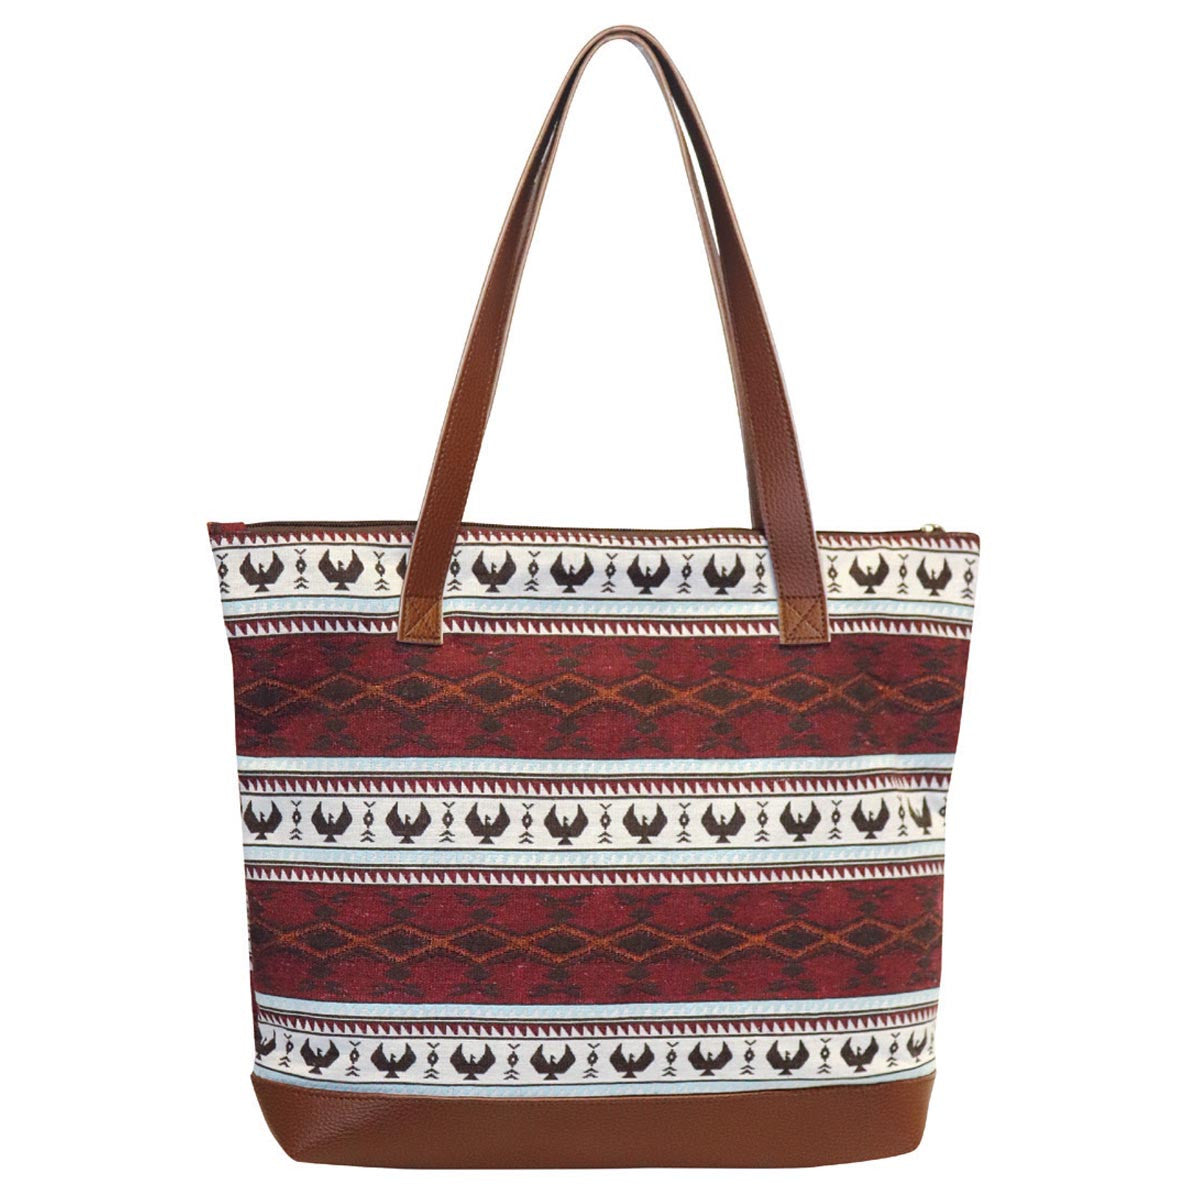 Woven Tote Bag - by Leila Stogan